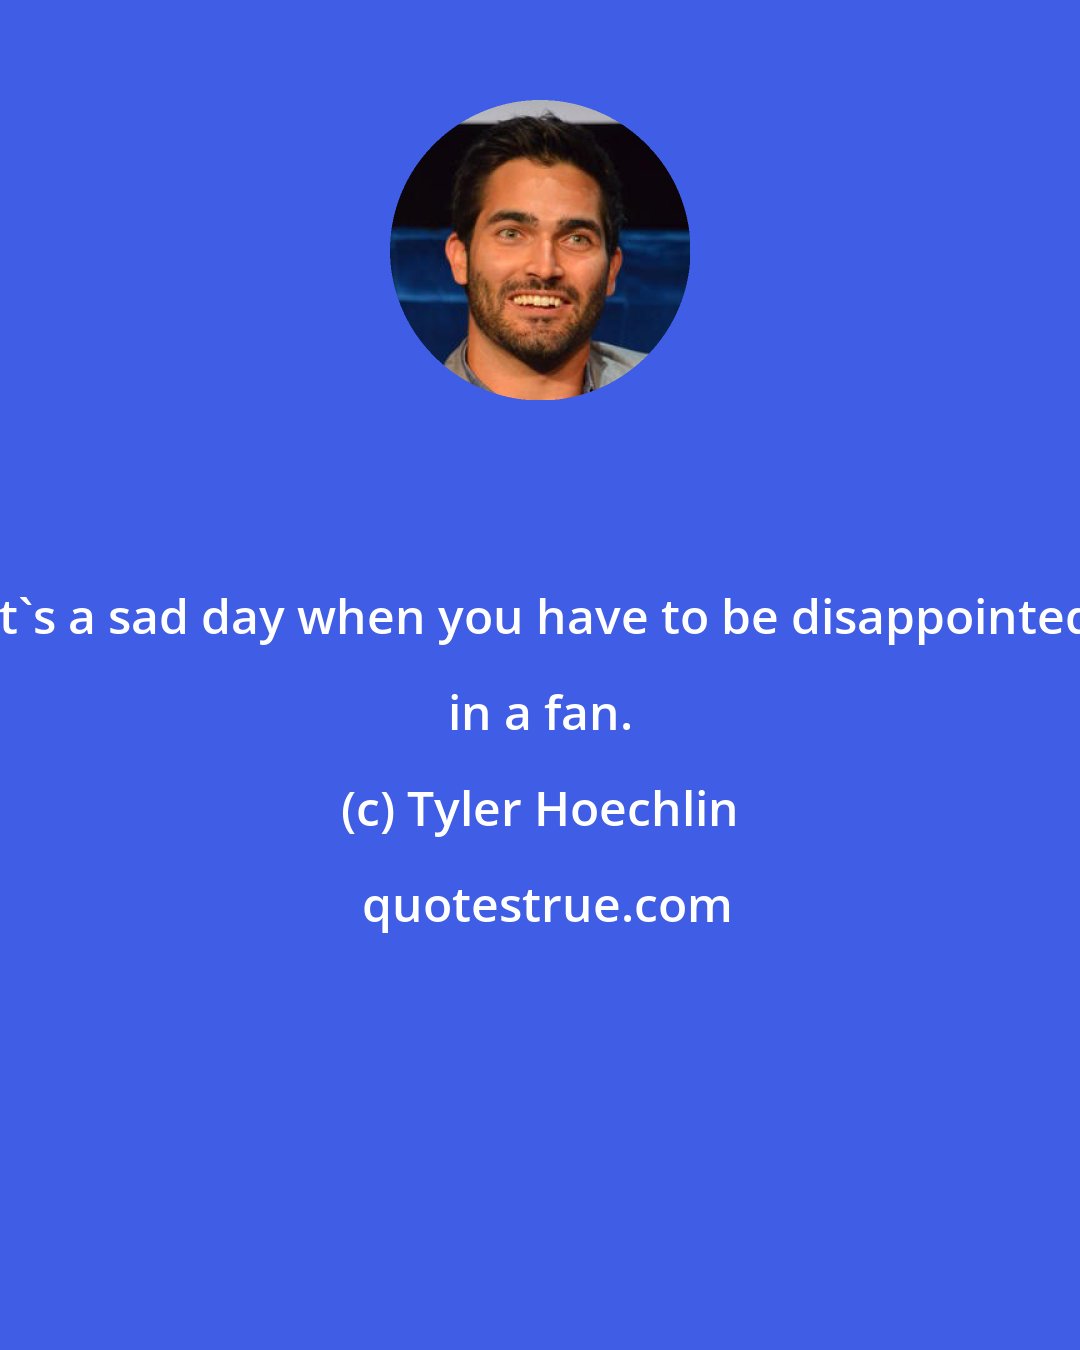 Tyler Hoechlin: It's a sad day when you have to be disappointed in a fan.